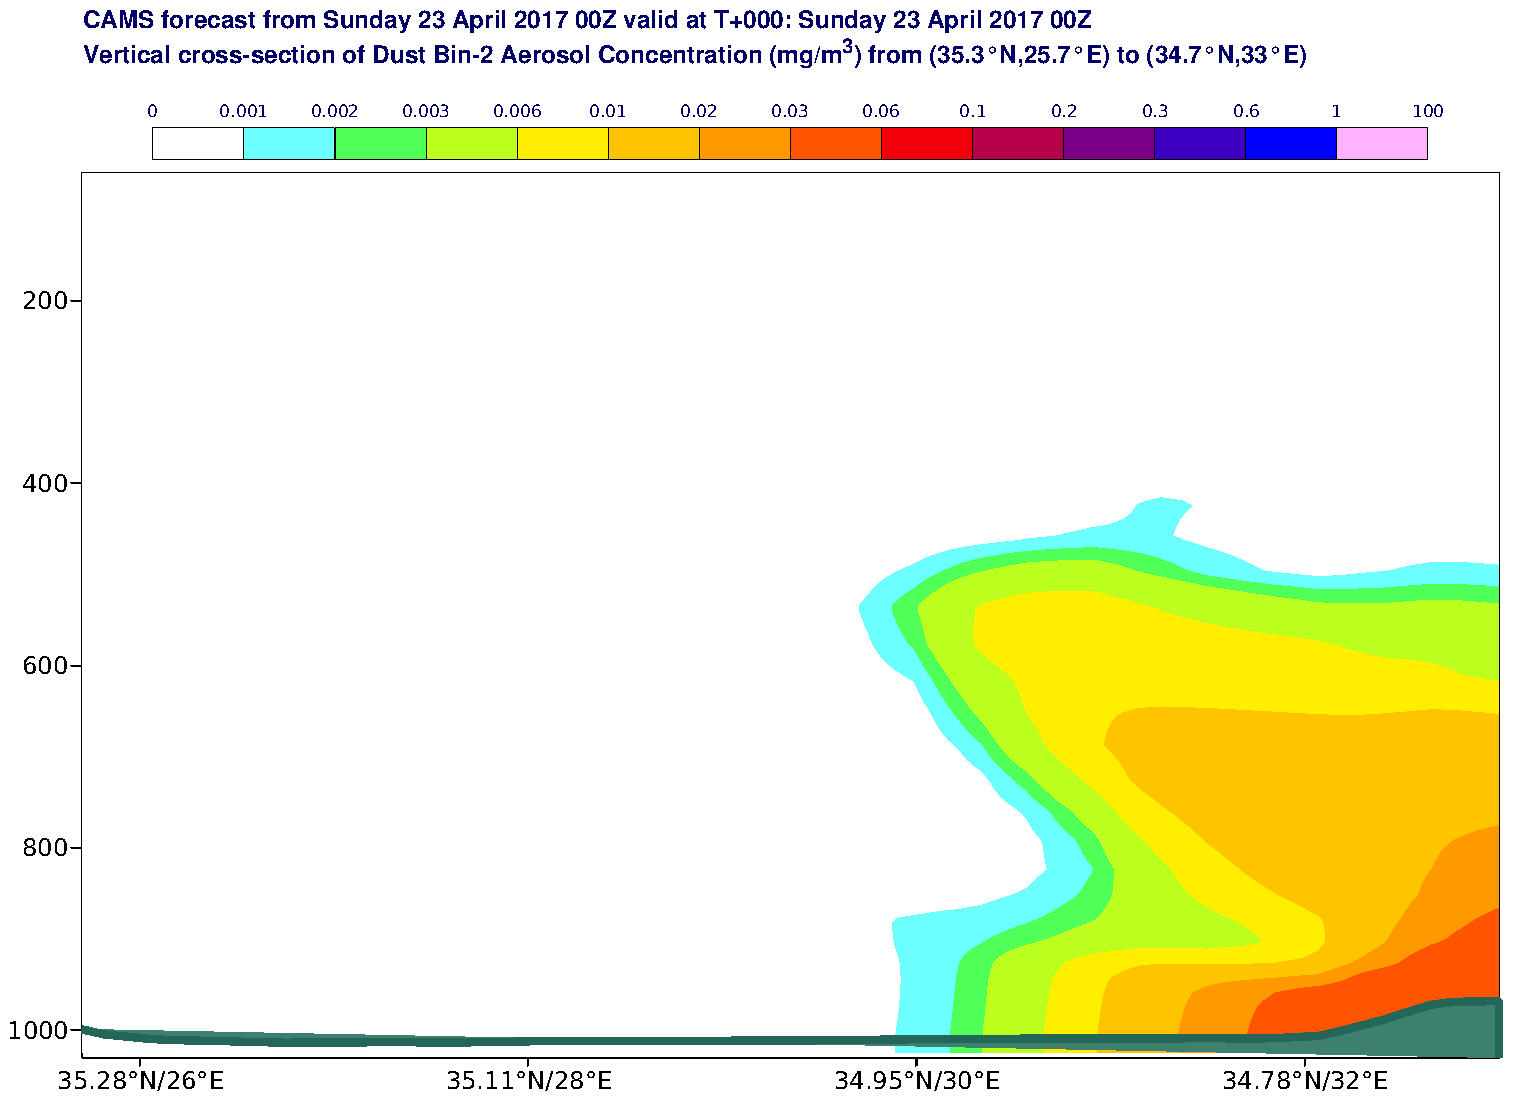 Vertical cross-section of Dust Bin-2 Aerosol Concentration (mg/m3) valid at T0 - 2017-04-23 00:00